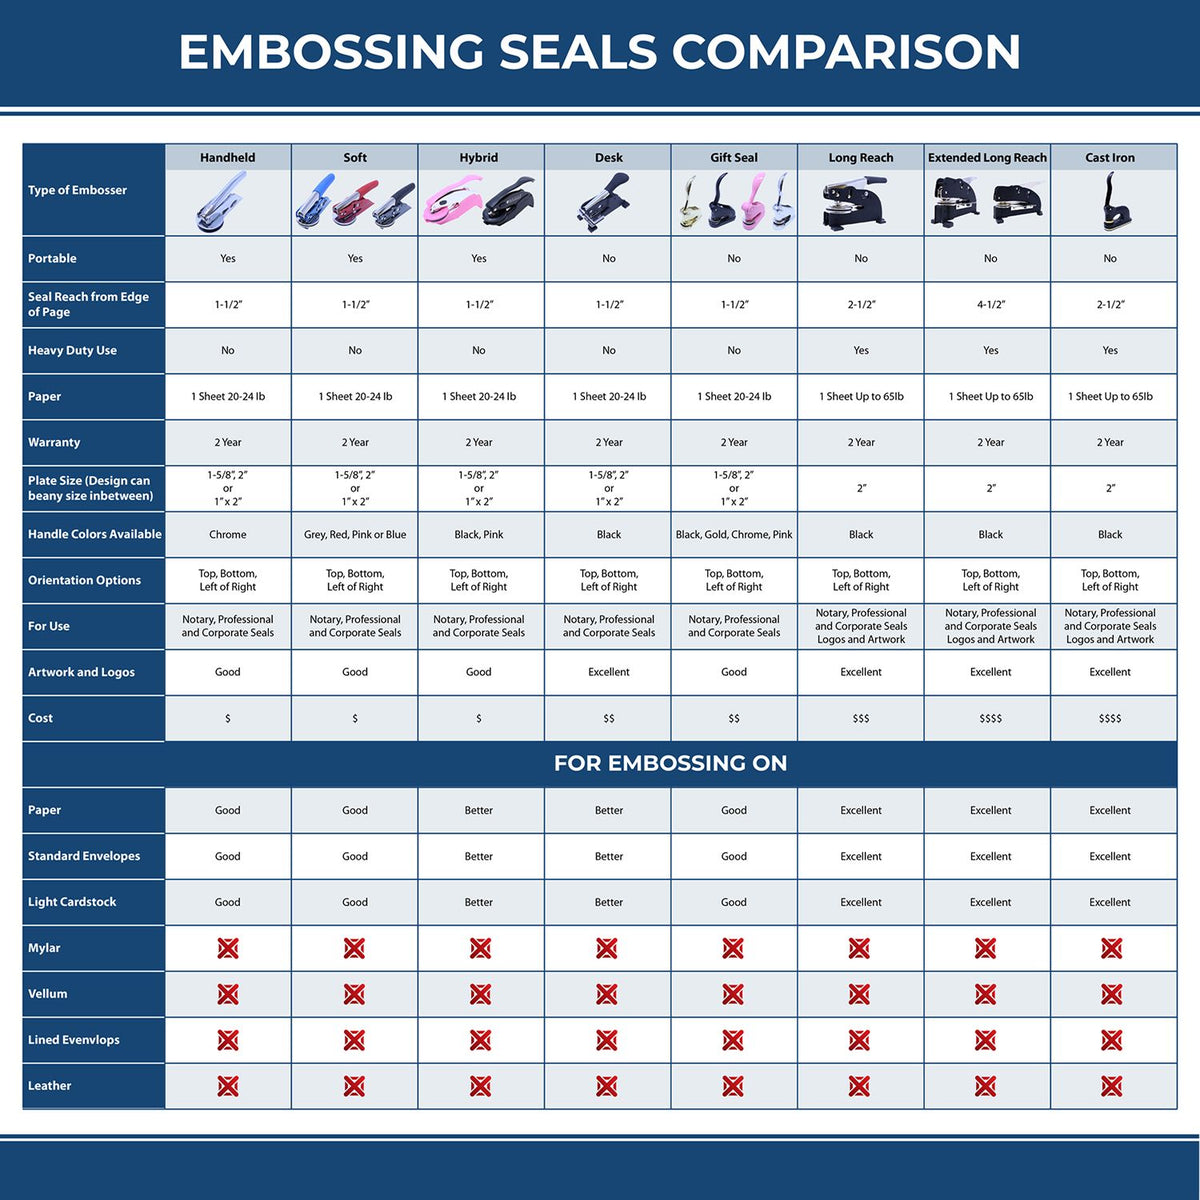 A comparison chart for the different types of mount models available for the Handheld Georgia Professional Engineer Embosser.